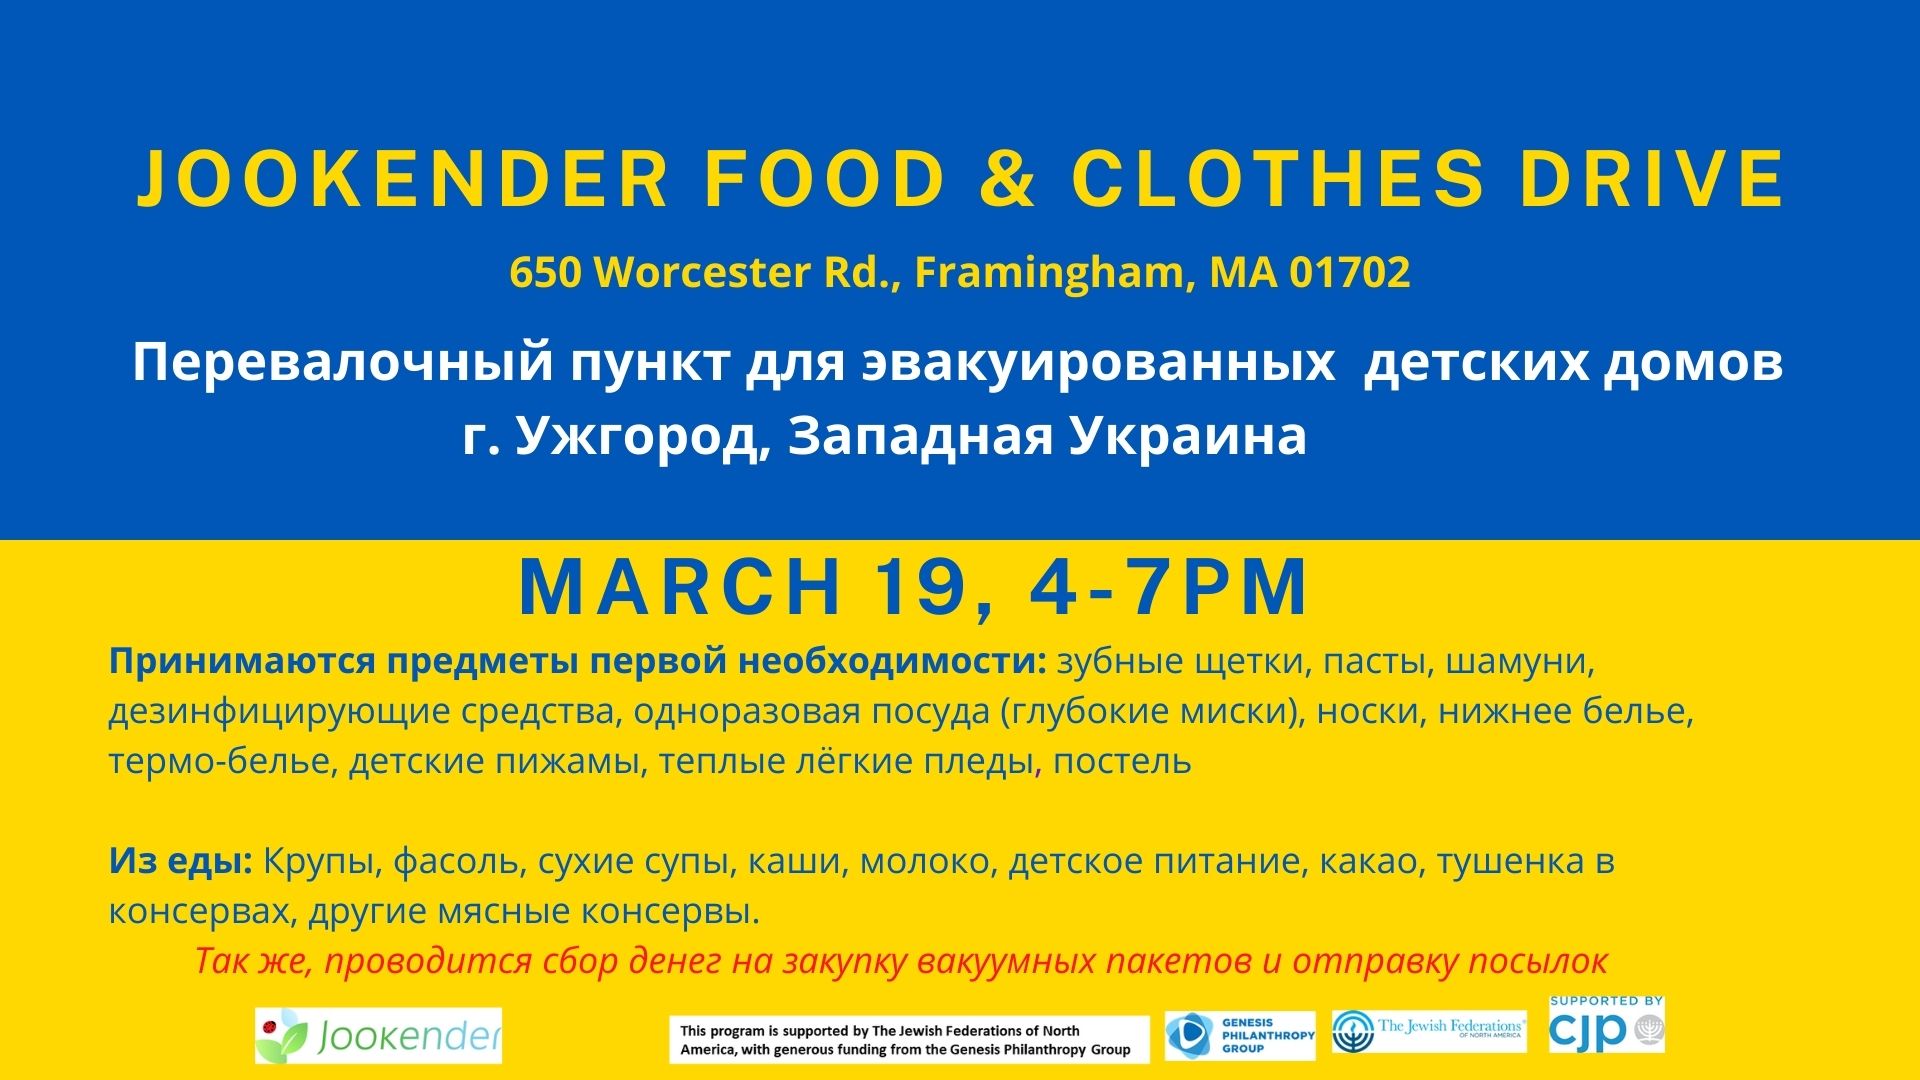 Jookender Food & Clothes Drive